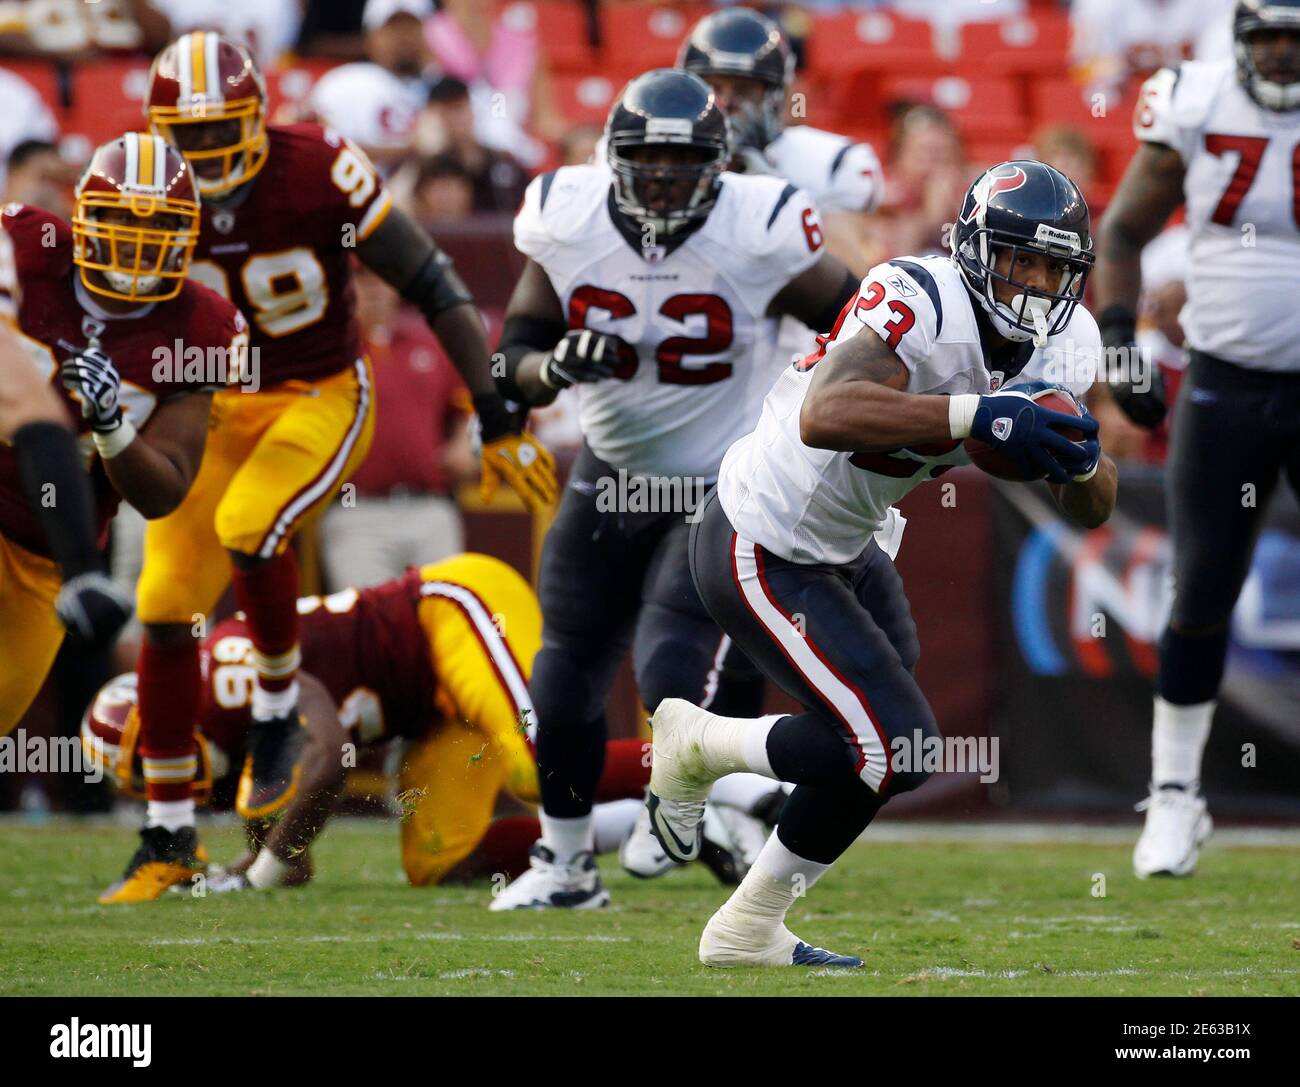 Washington Redskins chase Houston Texans Arian Foster in the second quarter of NFL football game in Landover, Maryland, September 19, 2010.   REUTERS/Larry Downing (UNITED STATES - Tags: SPORT FOOTBALL) Stock Photo